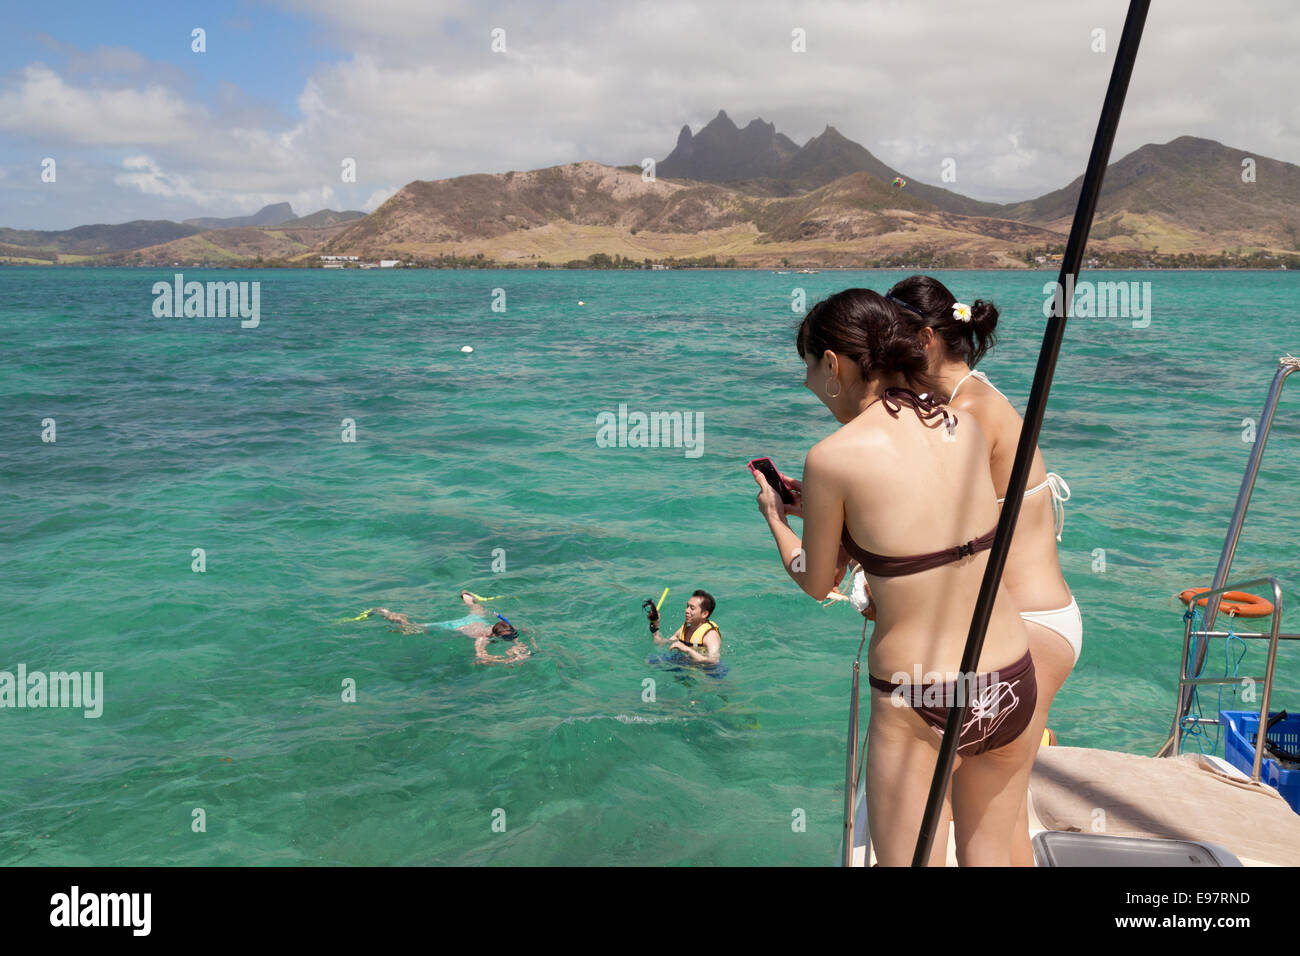 Mauritius travel; Tourists snorkelling in Mauritius, Indian ocean, Africa Stock Photo